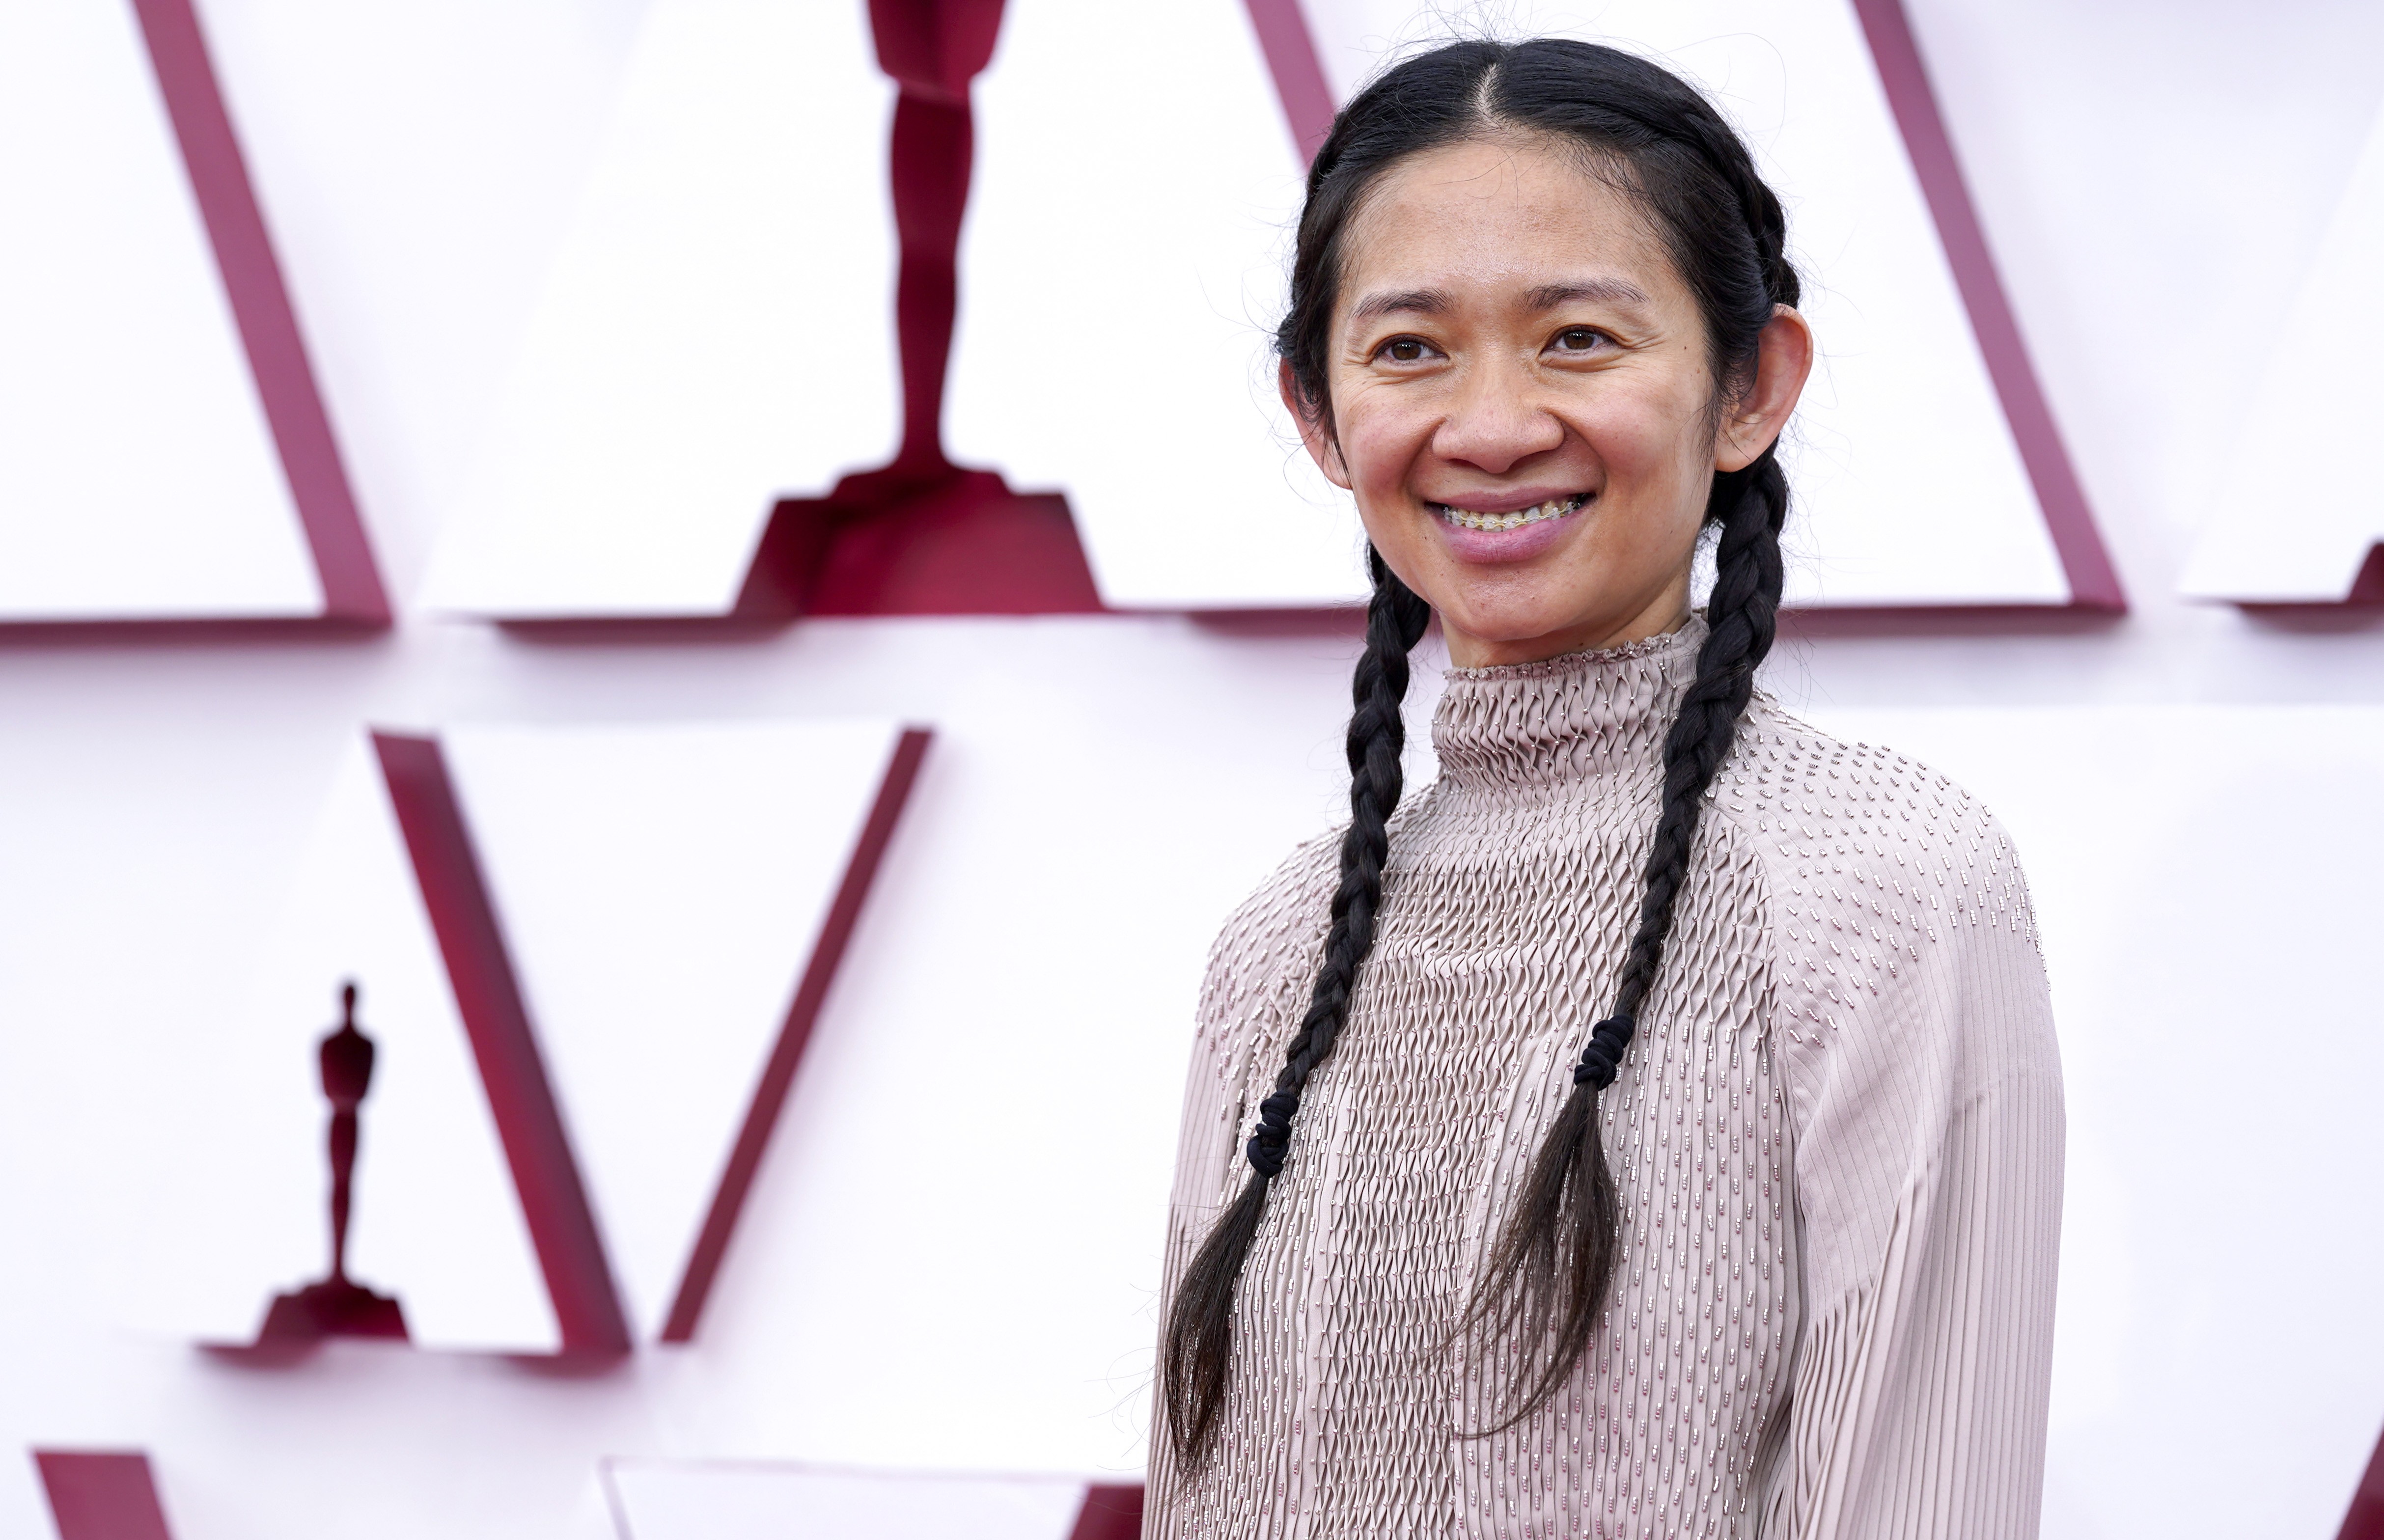 LOS ANGELES, CALIFORNIA – APRIL 25: Chloe Zhao attends the 93rd Annual Academy Awards at Union Station on April 25, 2021 in Los Angeles, California. (Photo by Chris Pizzello-Pool/Getty Images) (Foto: Getty Images)